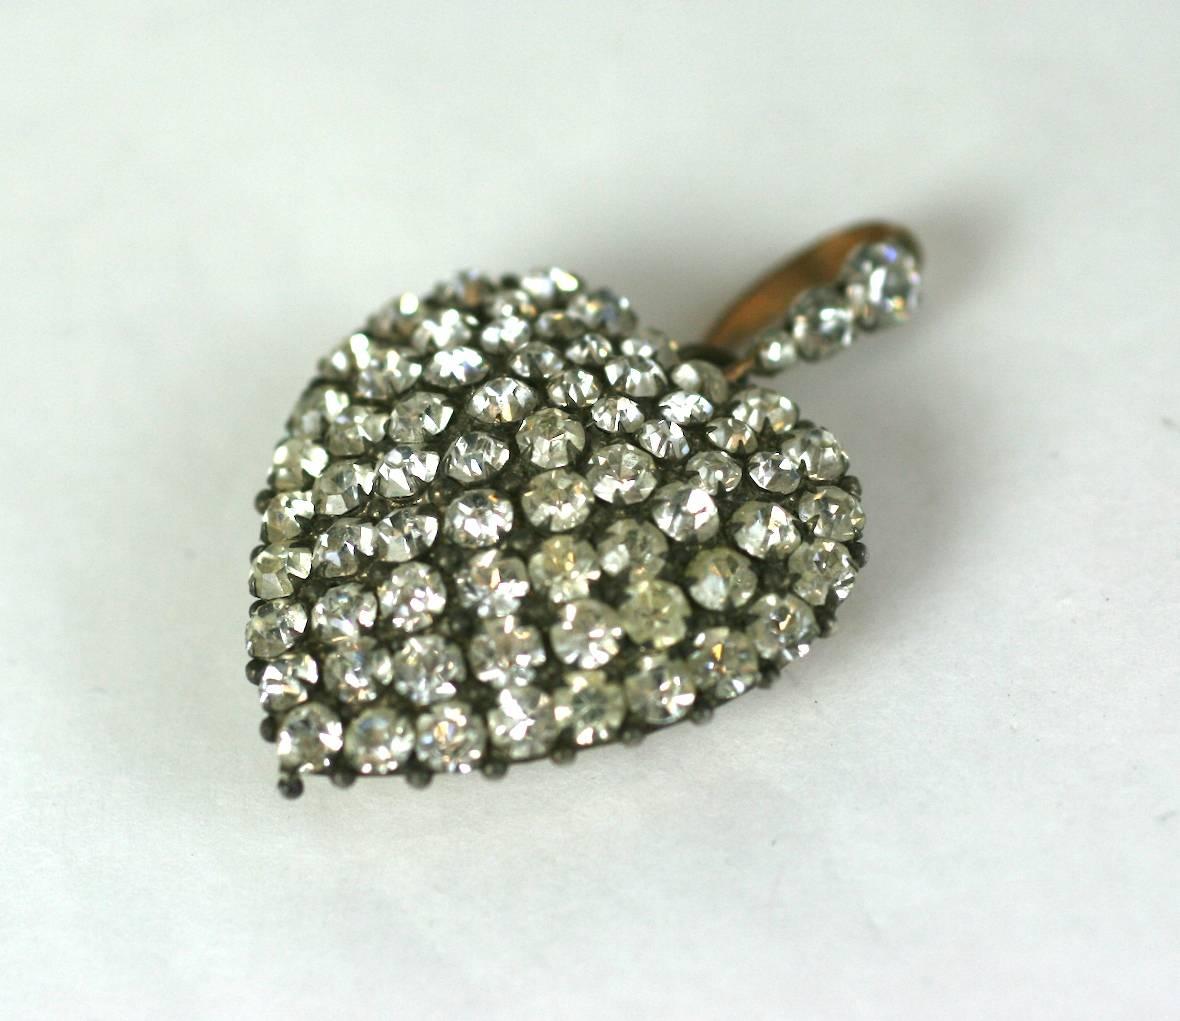 Unusual Victorian gilt metal puffy heart pendant of vari sized, claw set crystal pave. The pendant suspended by a crystal pave bale and has a convex backing. Circa 1880.
Excellent Condition.
Heart measures 1.25